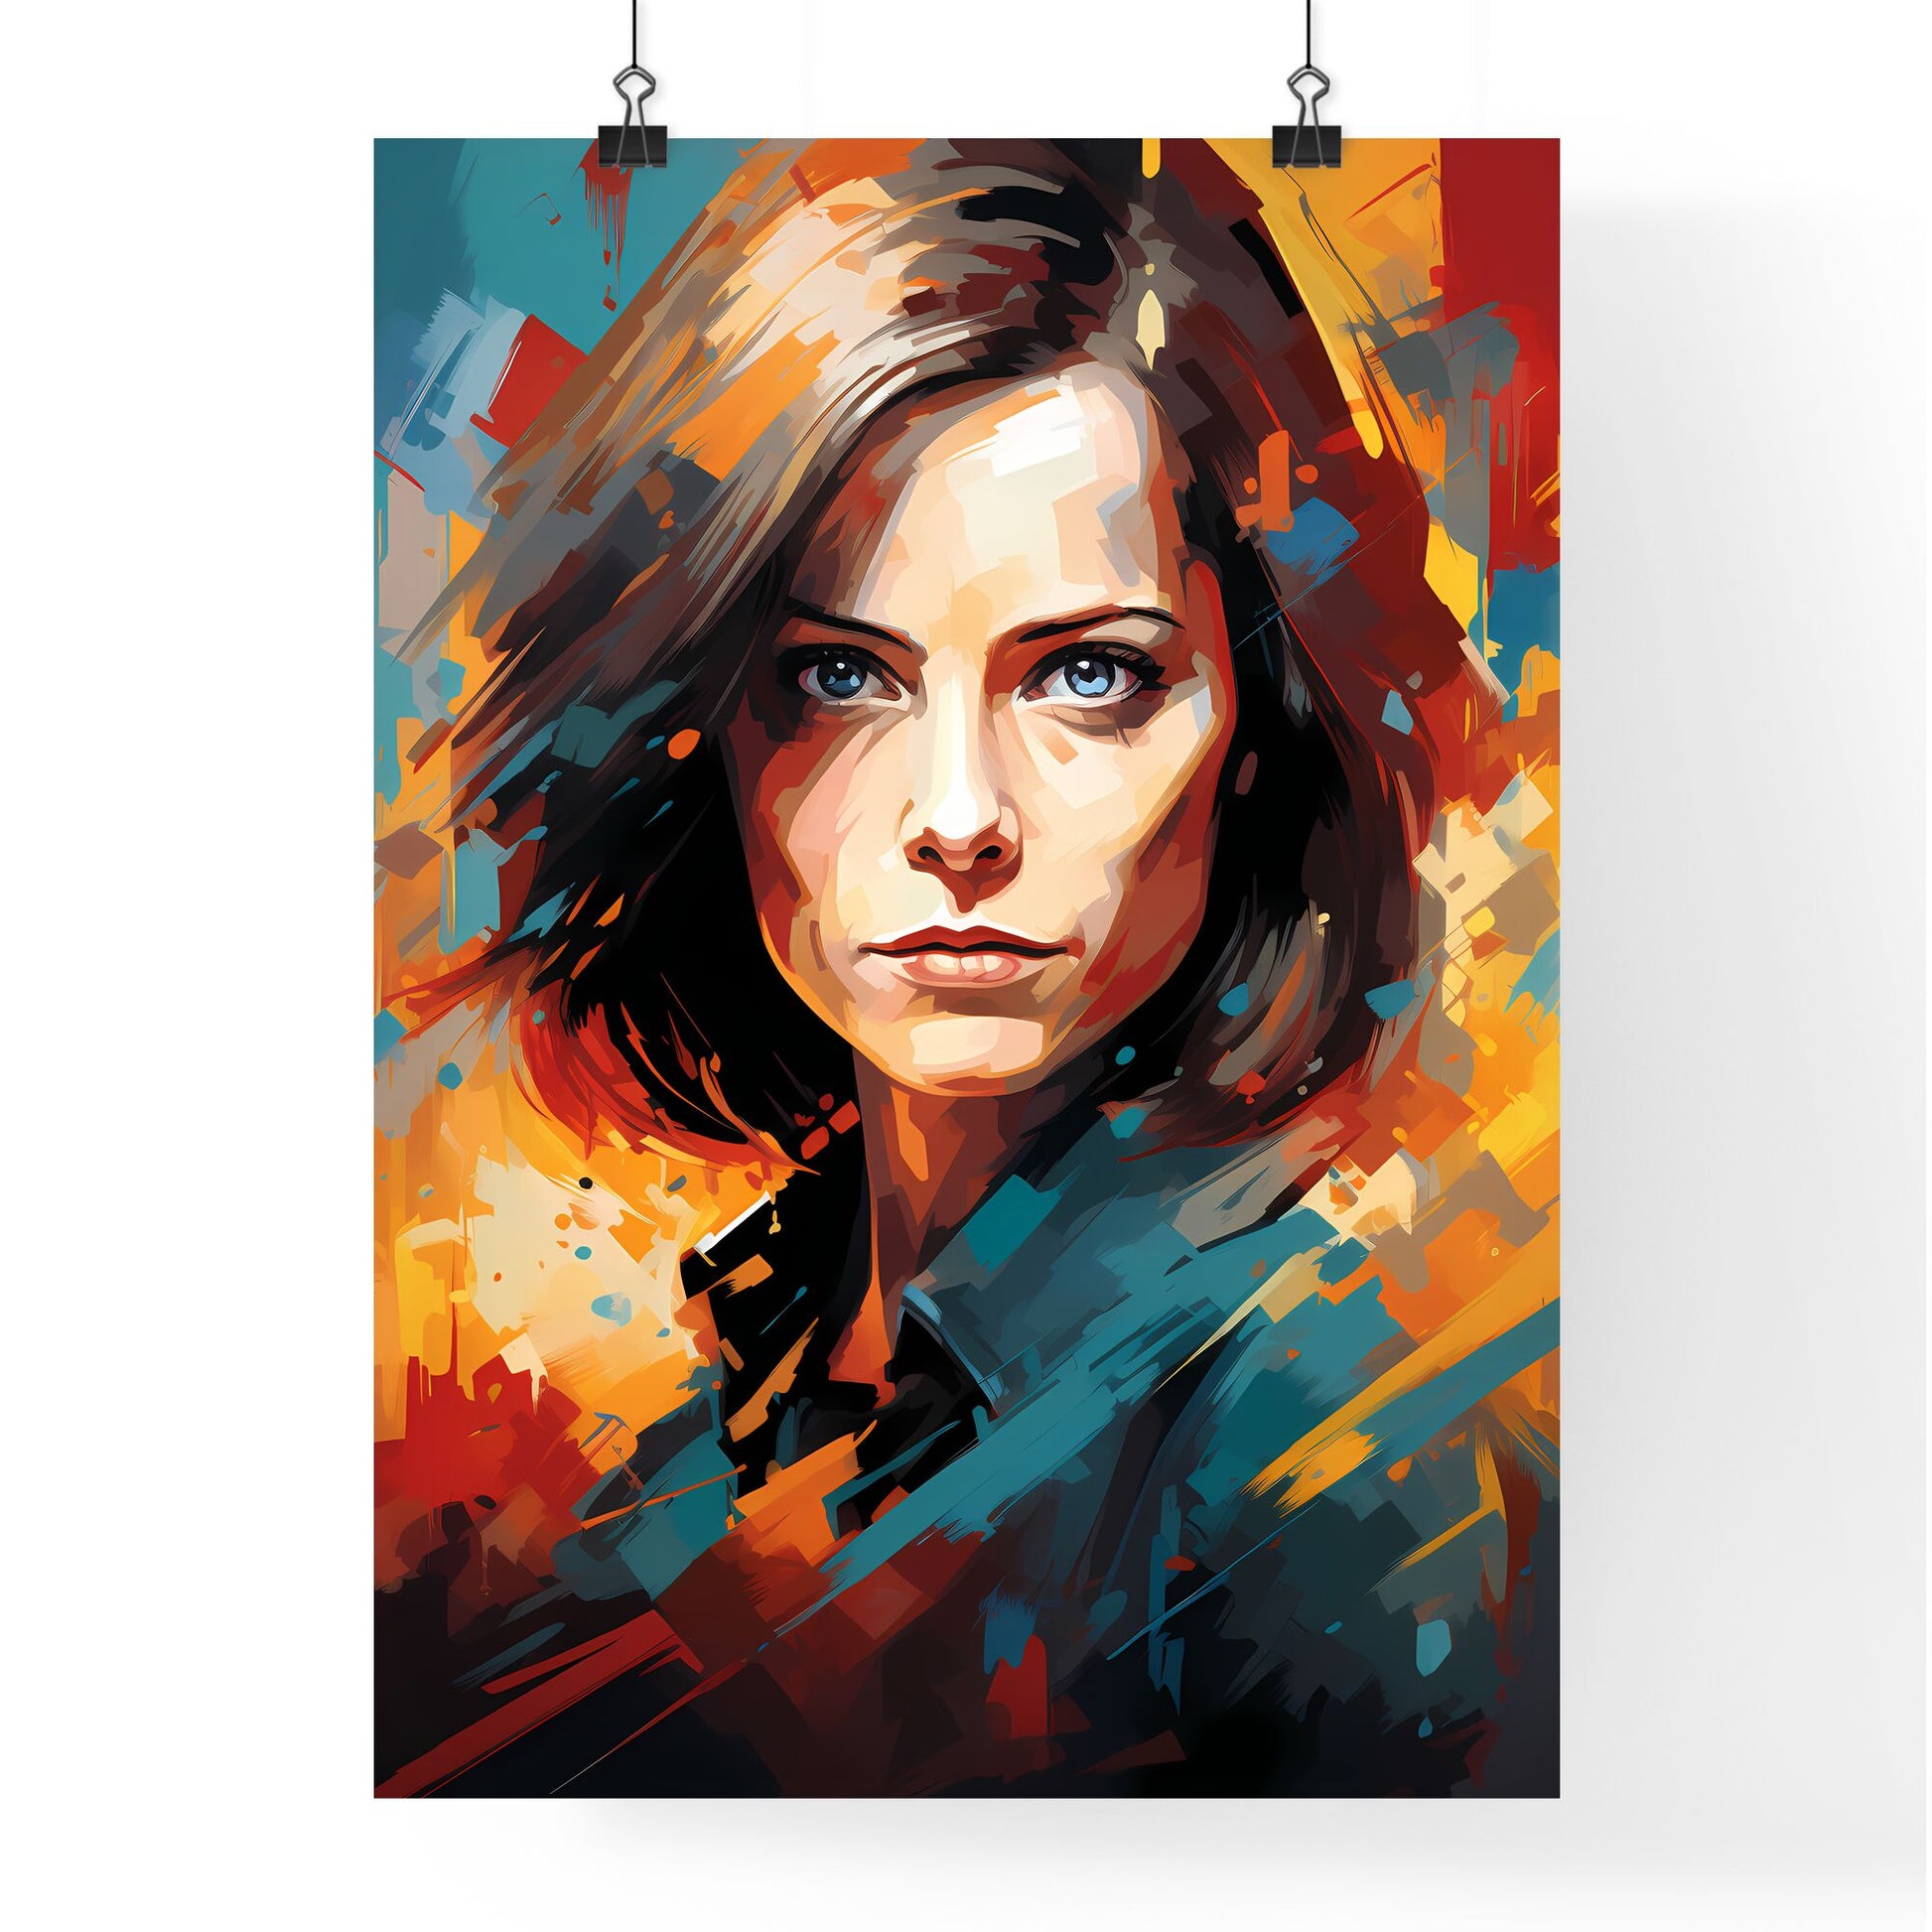 Clarice Starling Jodie Foster - A Woman With Short Brown Hair Default Title